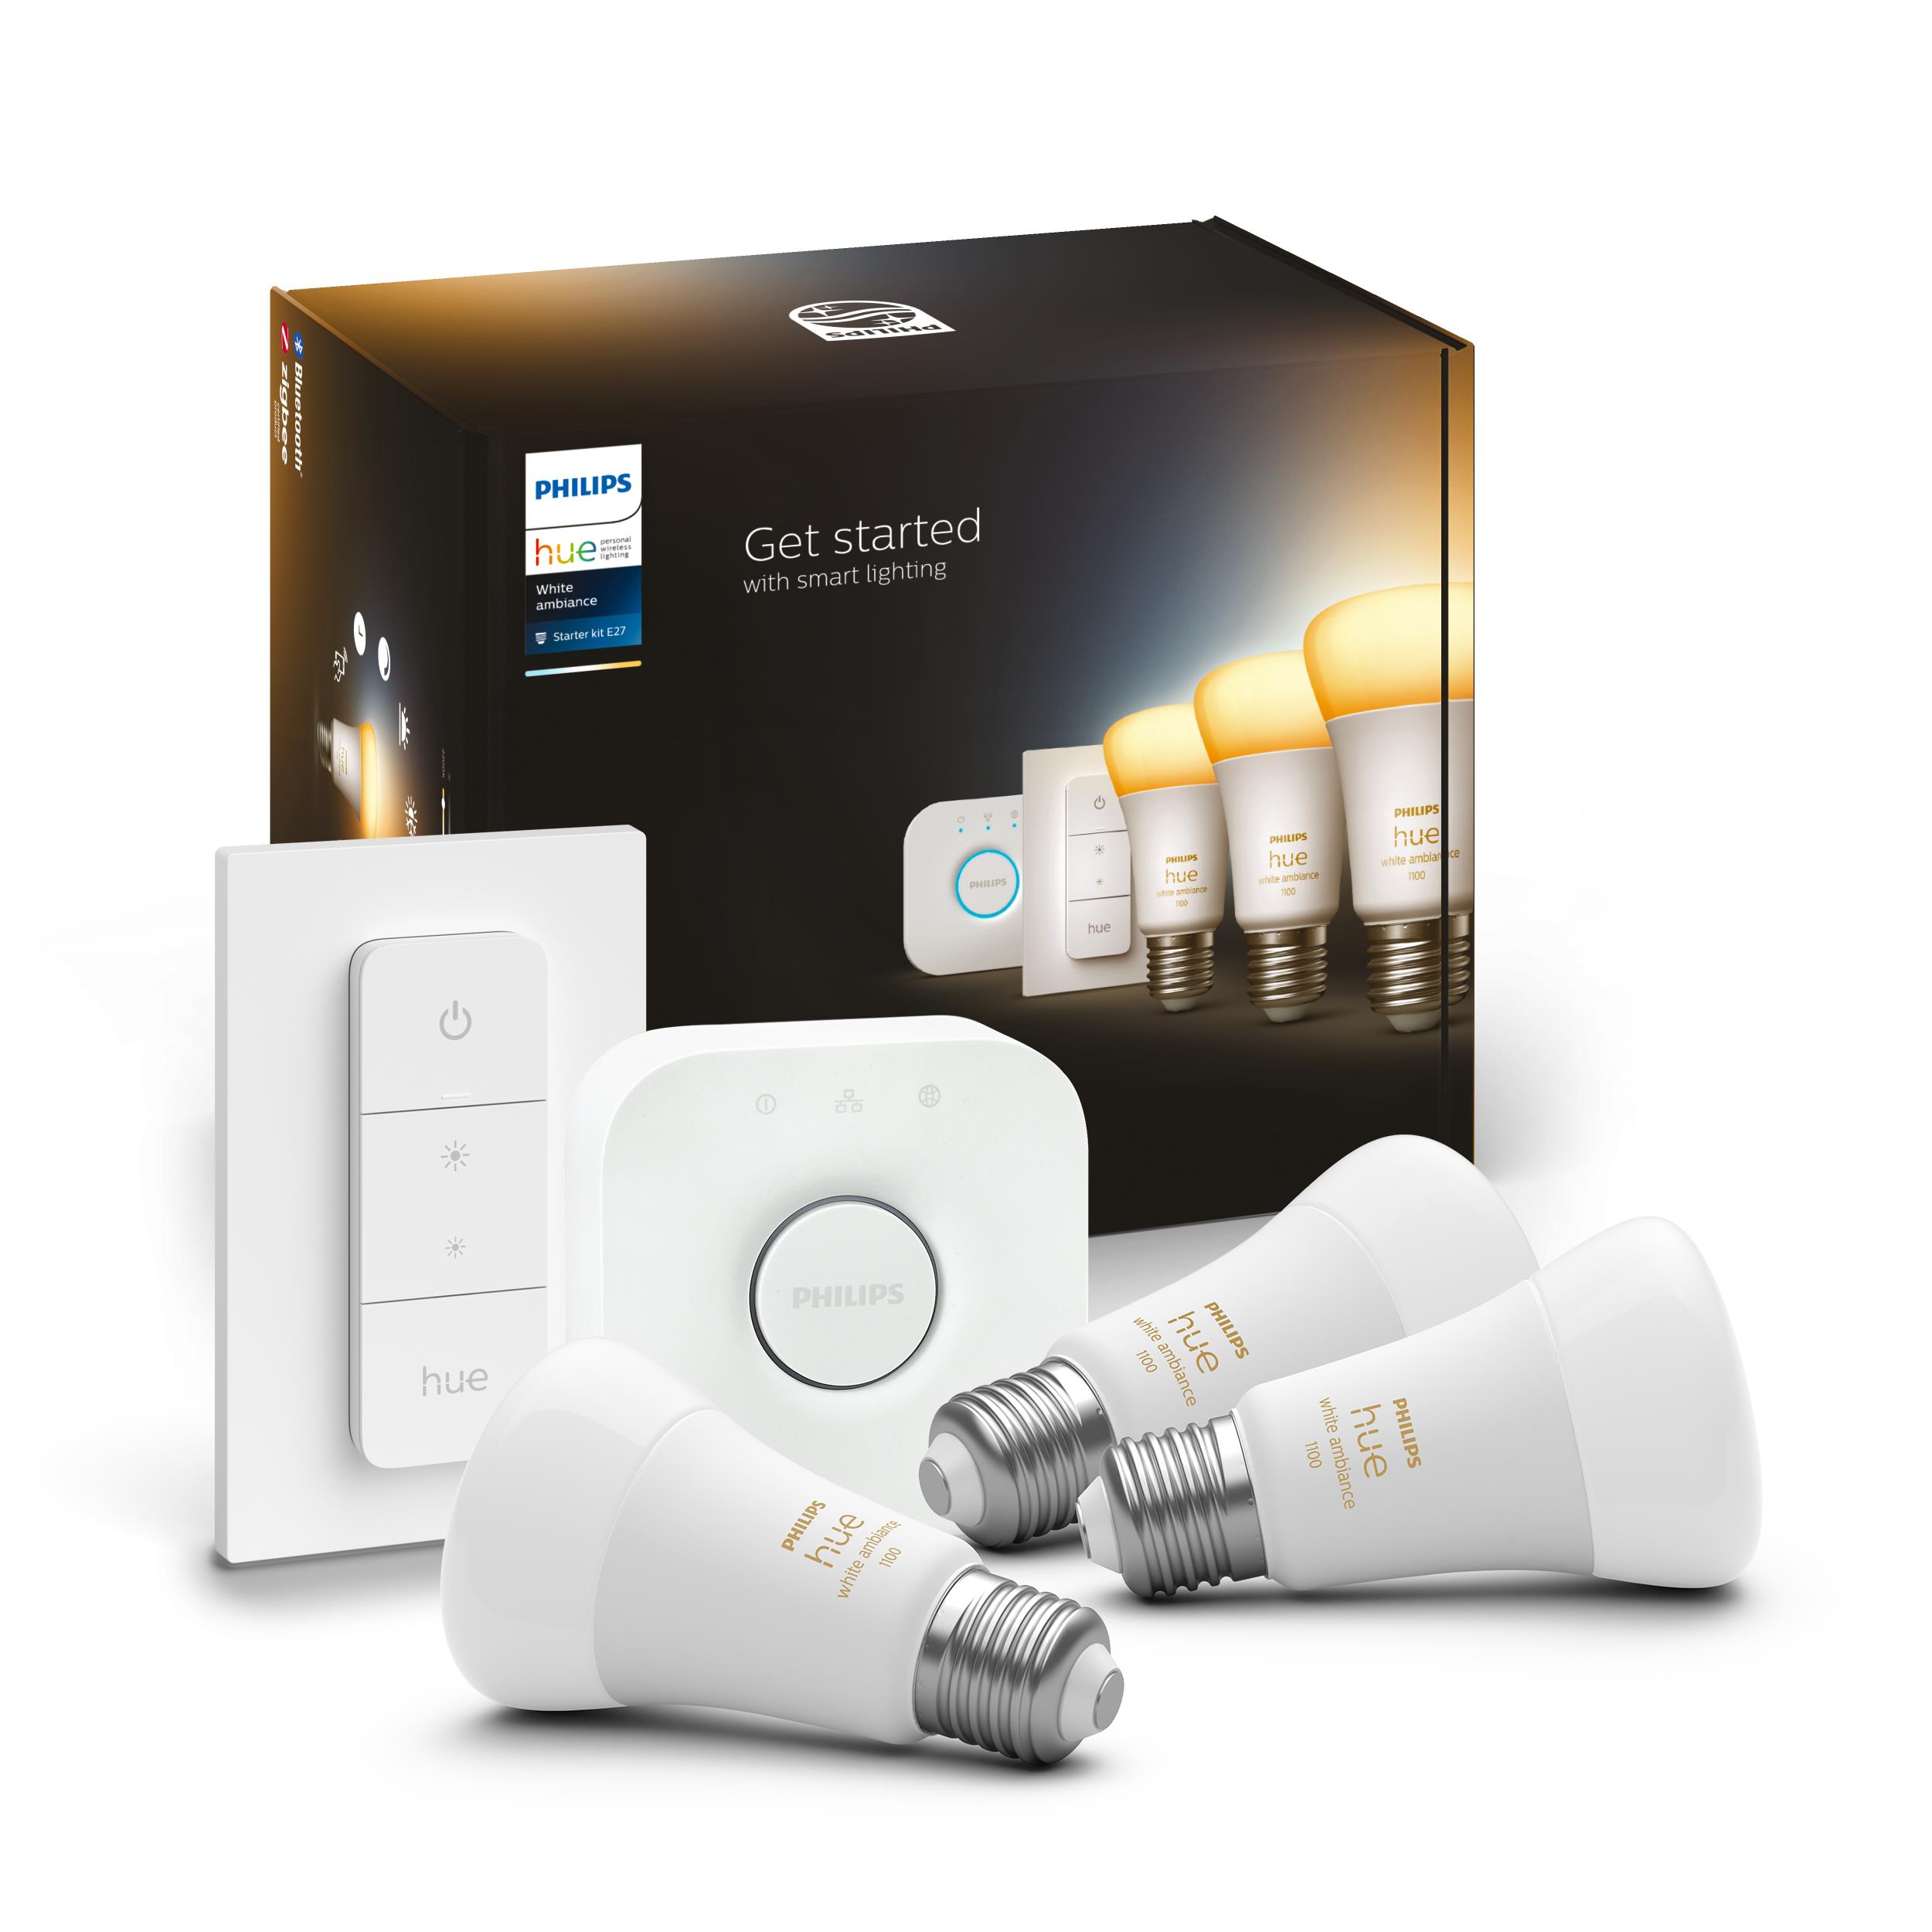 Bec LED Philips Hue alb Ambiance LED E27 Triple Starter Set cu button dimming 800lm